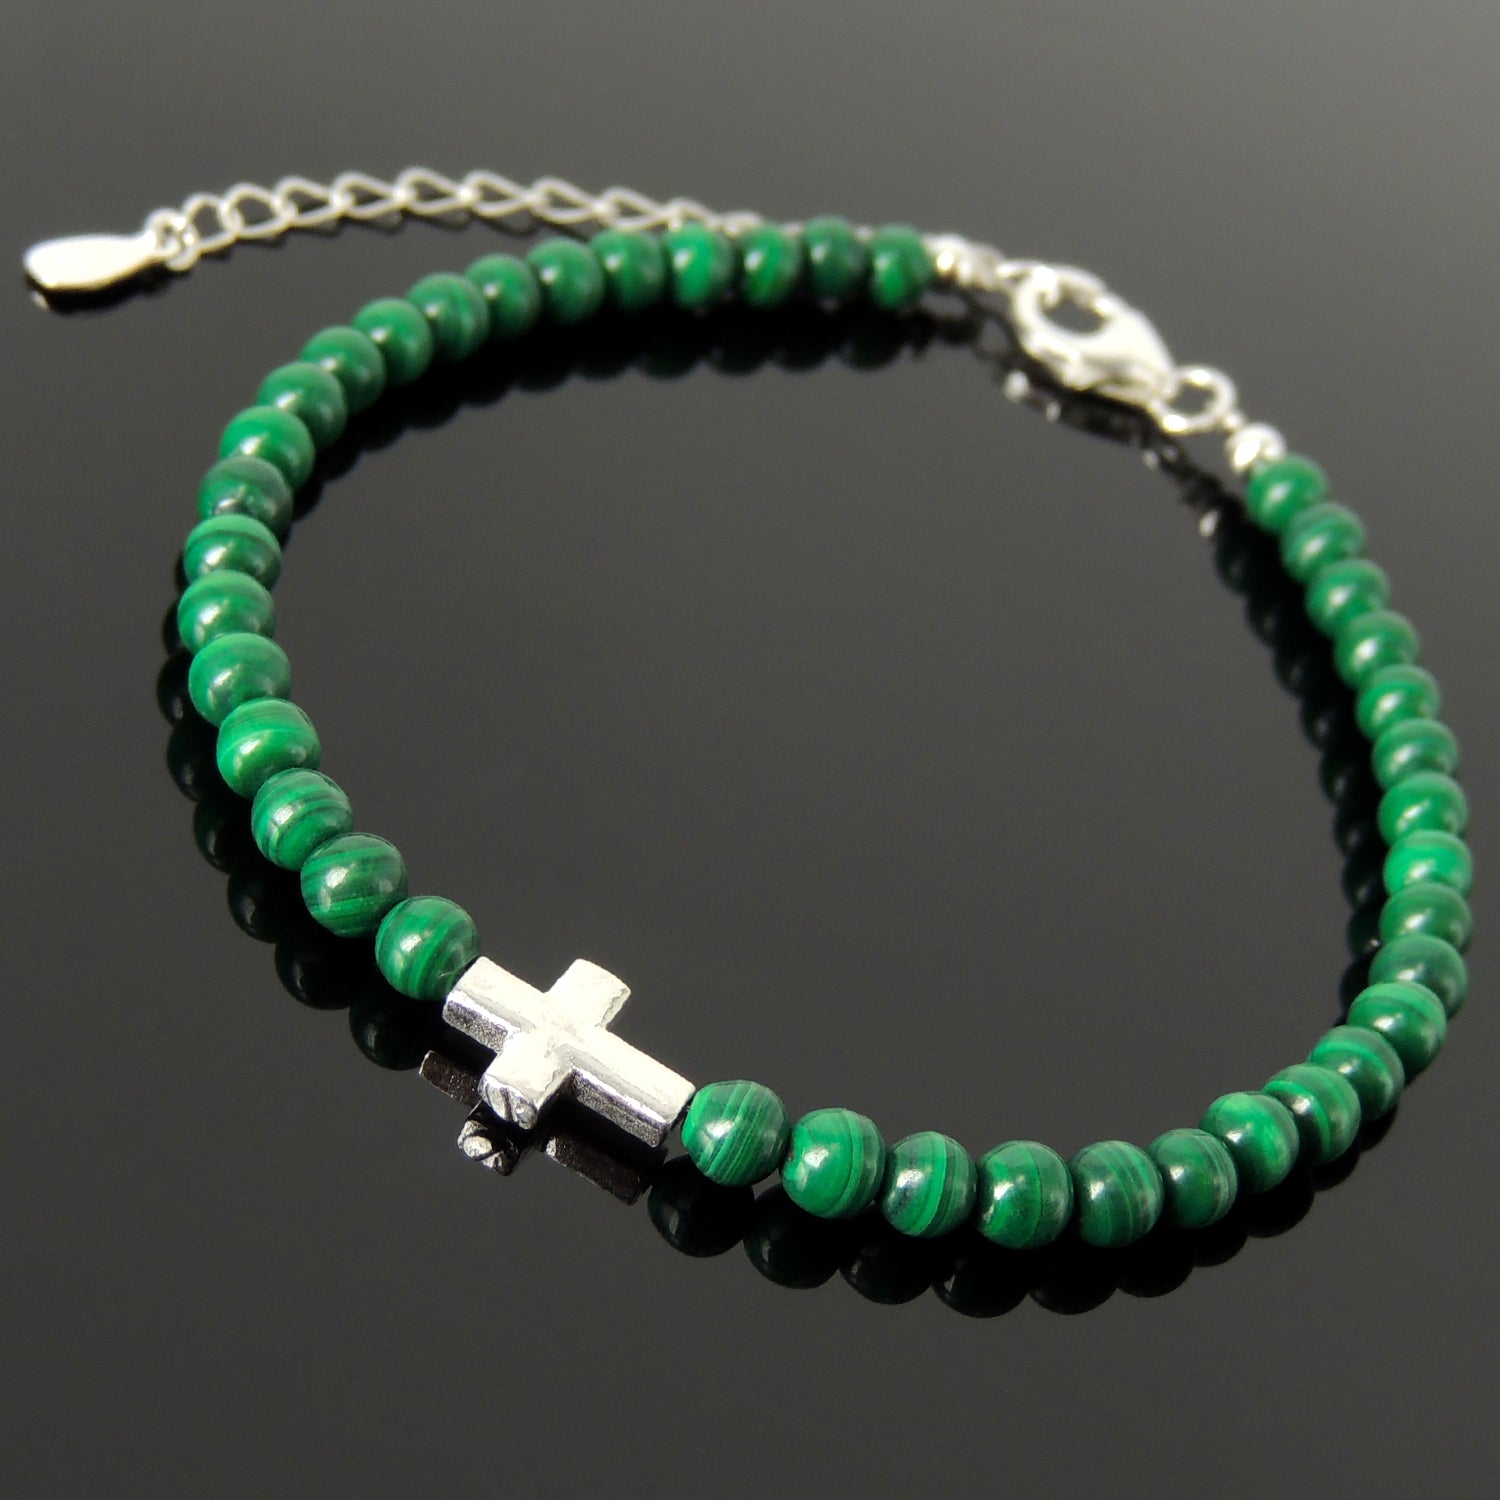 Handmade Adjustable Clasp Bracelet - Men's Women's Cross Jewelry, Courage with 4mm Malachite Healing Gemstones, Genuine S925 Sterling Silver Beads, Chain (Non-Plated) BR1813